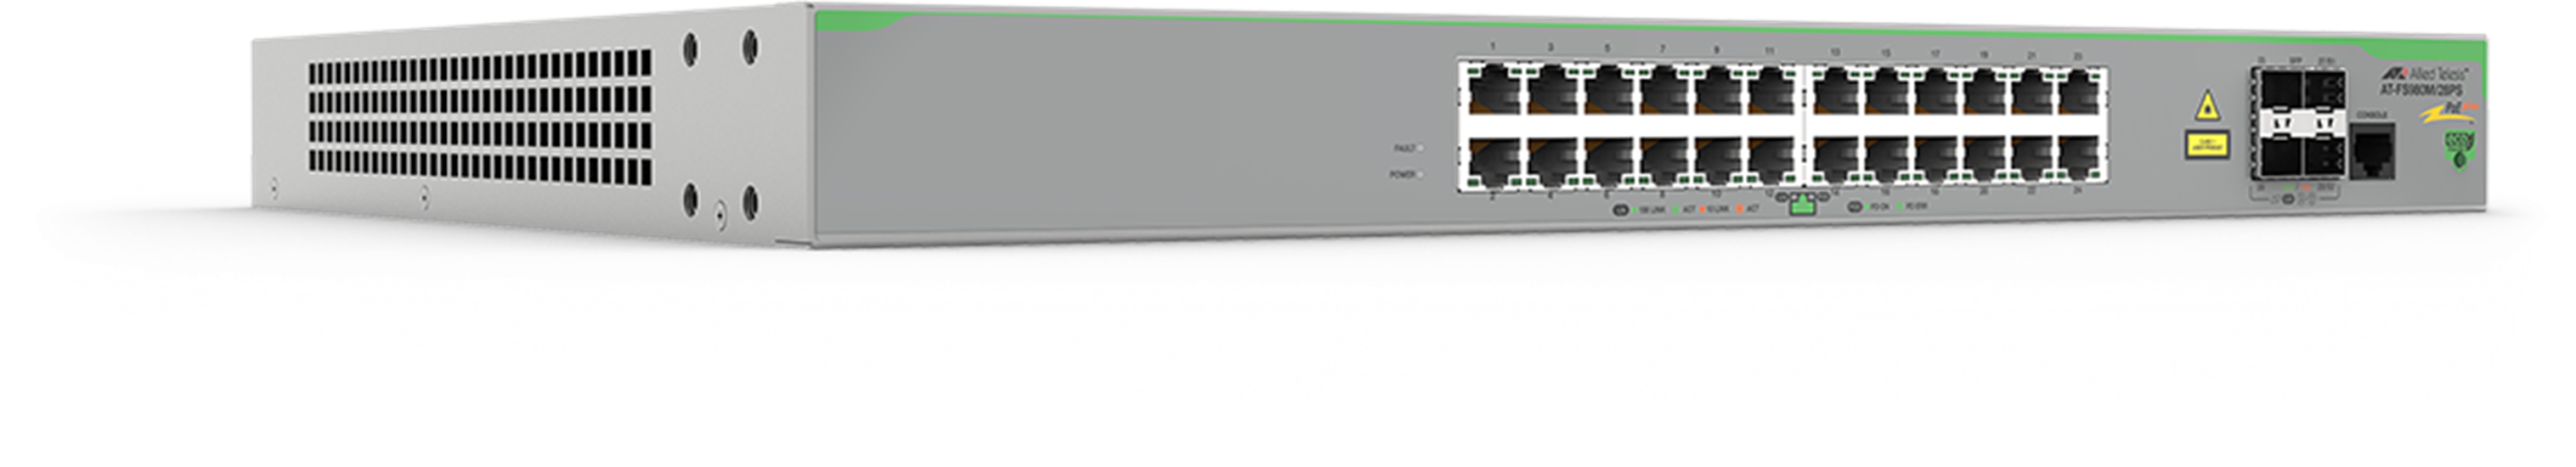 AT-FS980M Series - Layer 2 Fast Ethernet Switch